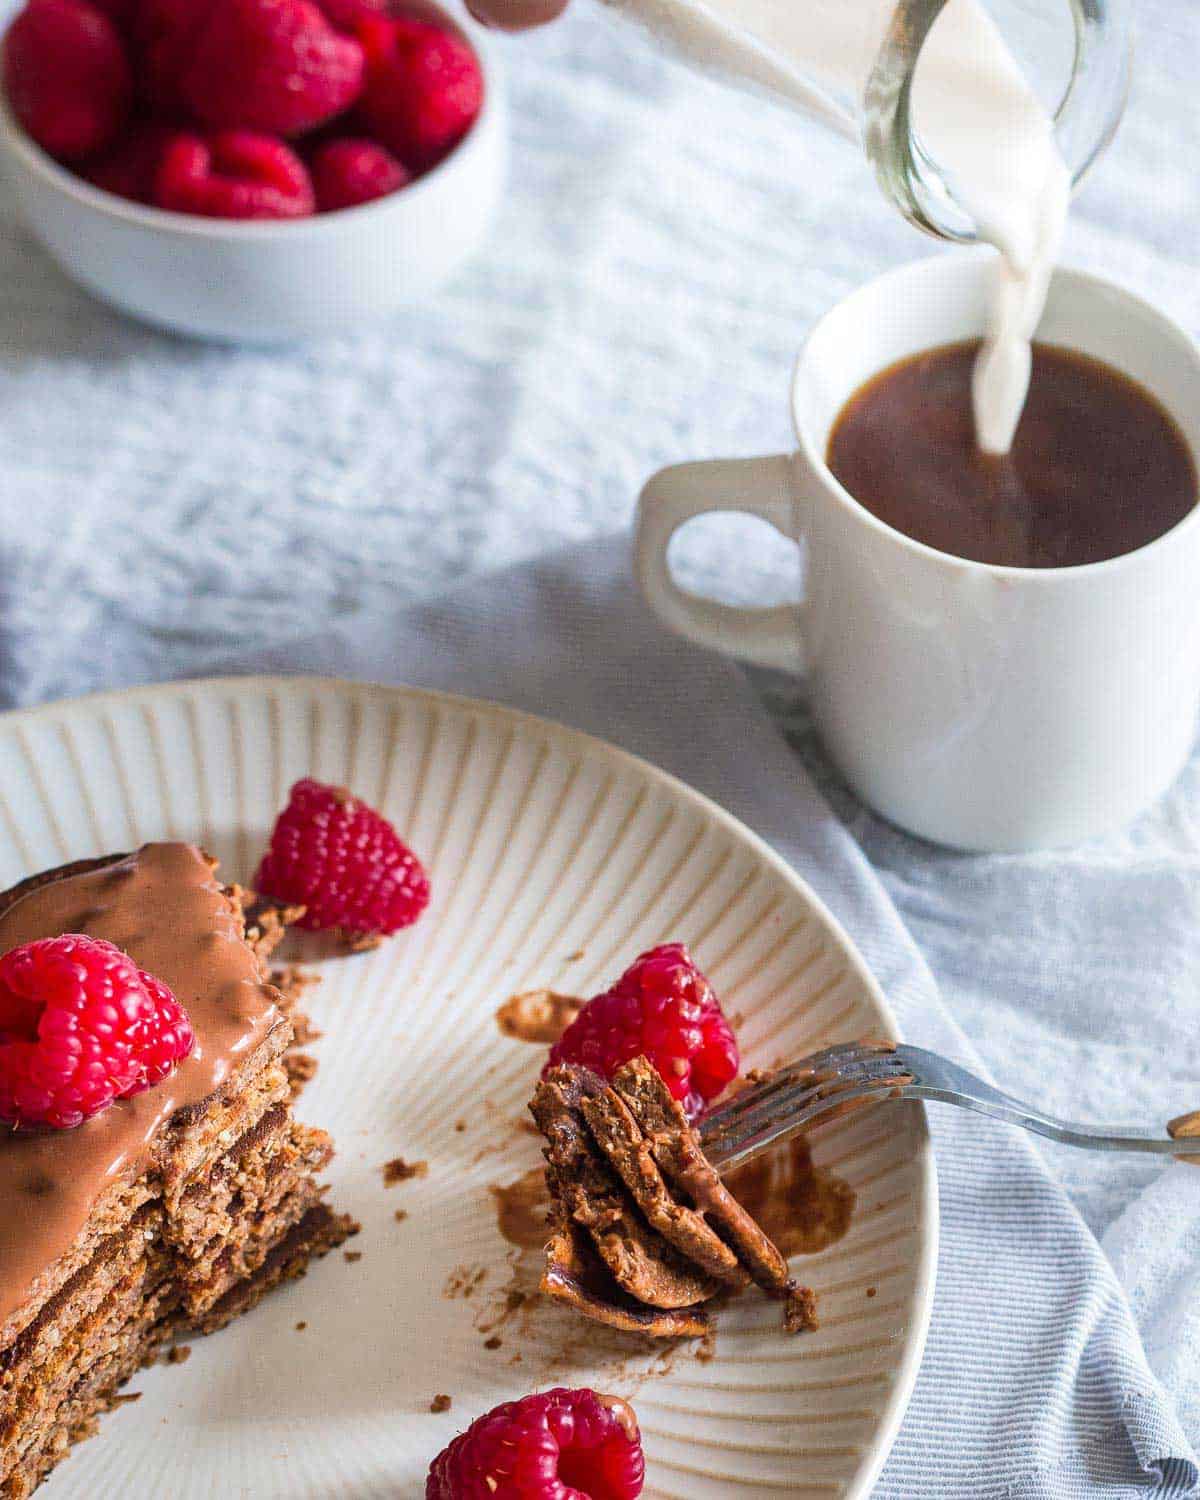 Start your day with some chocolate packed protein pancakes with this easy recipe.